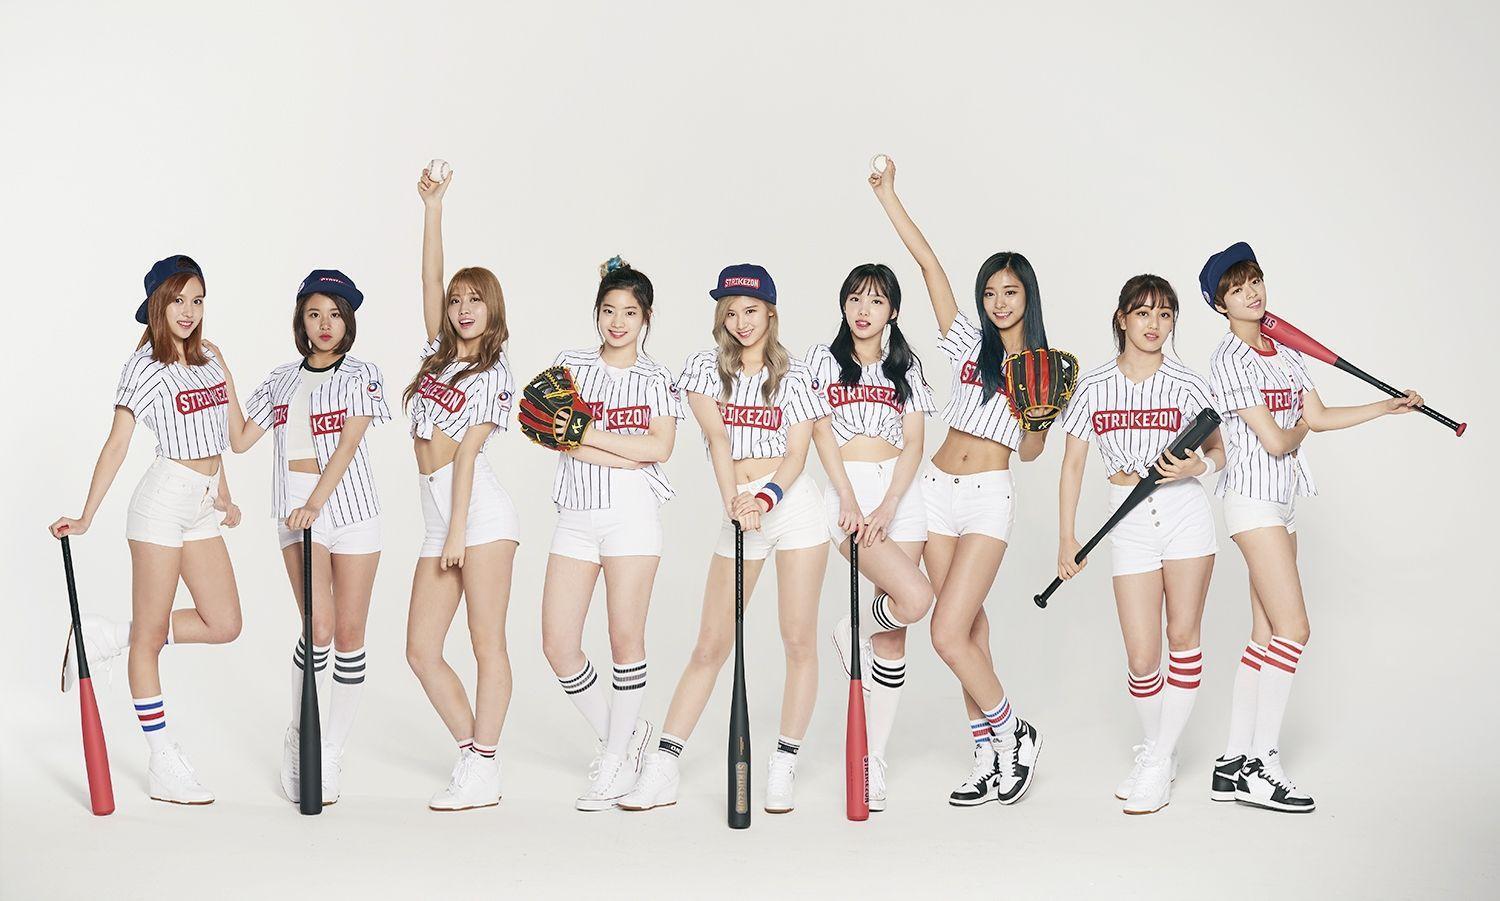 TWICE Wallpaper HD For Desktop and Phone - Visual Arts Ideas